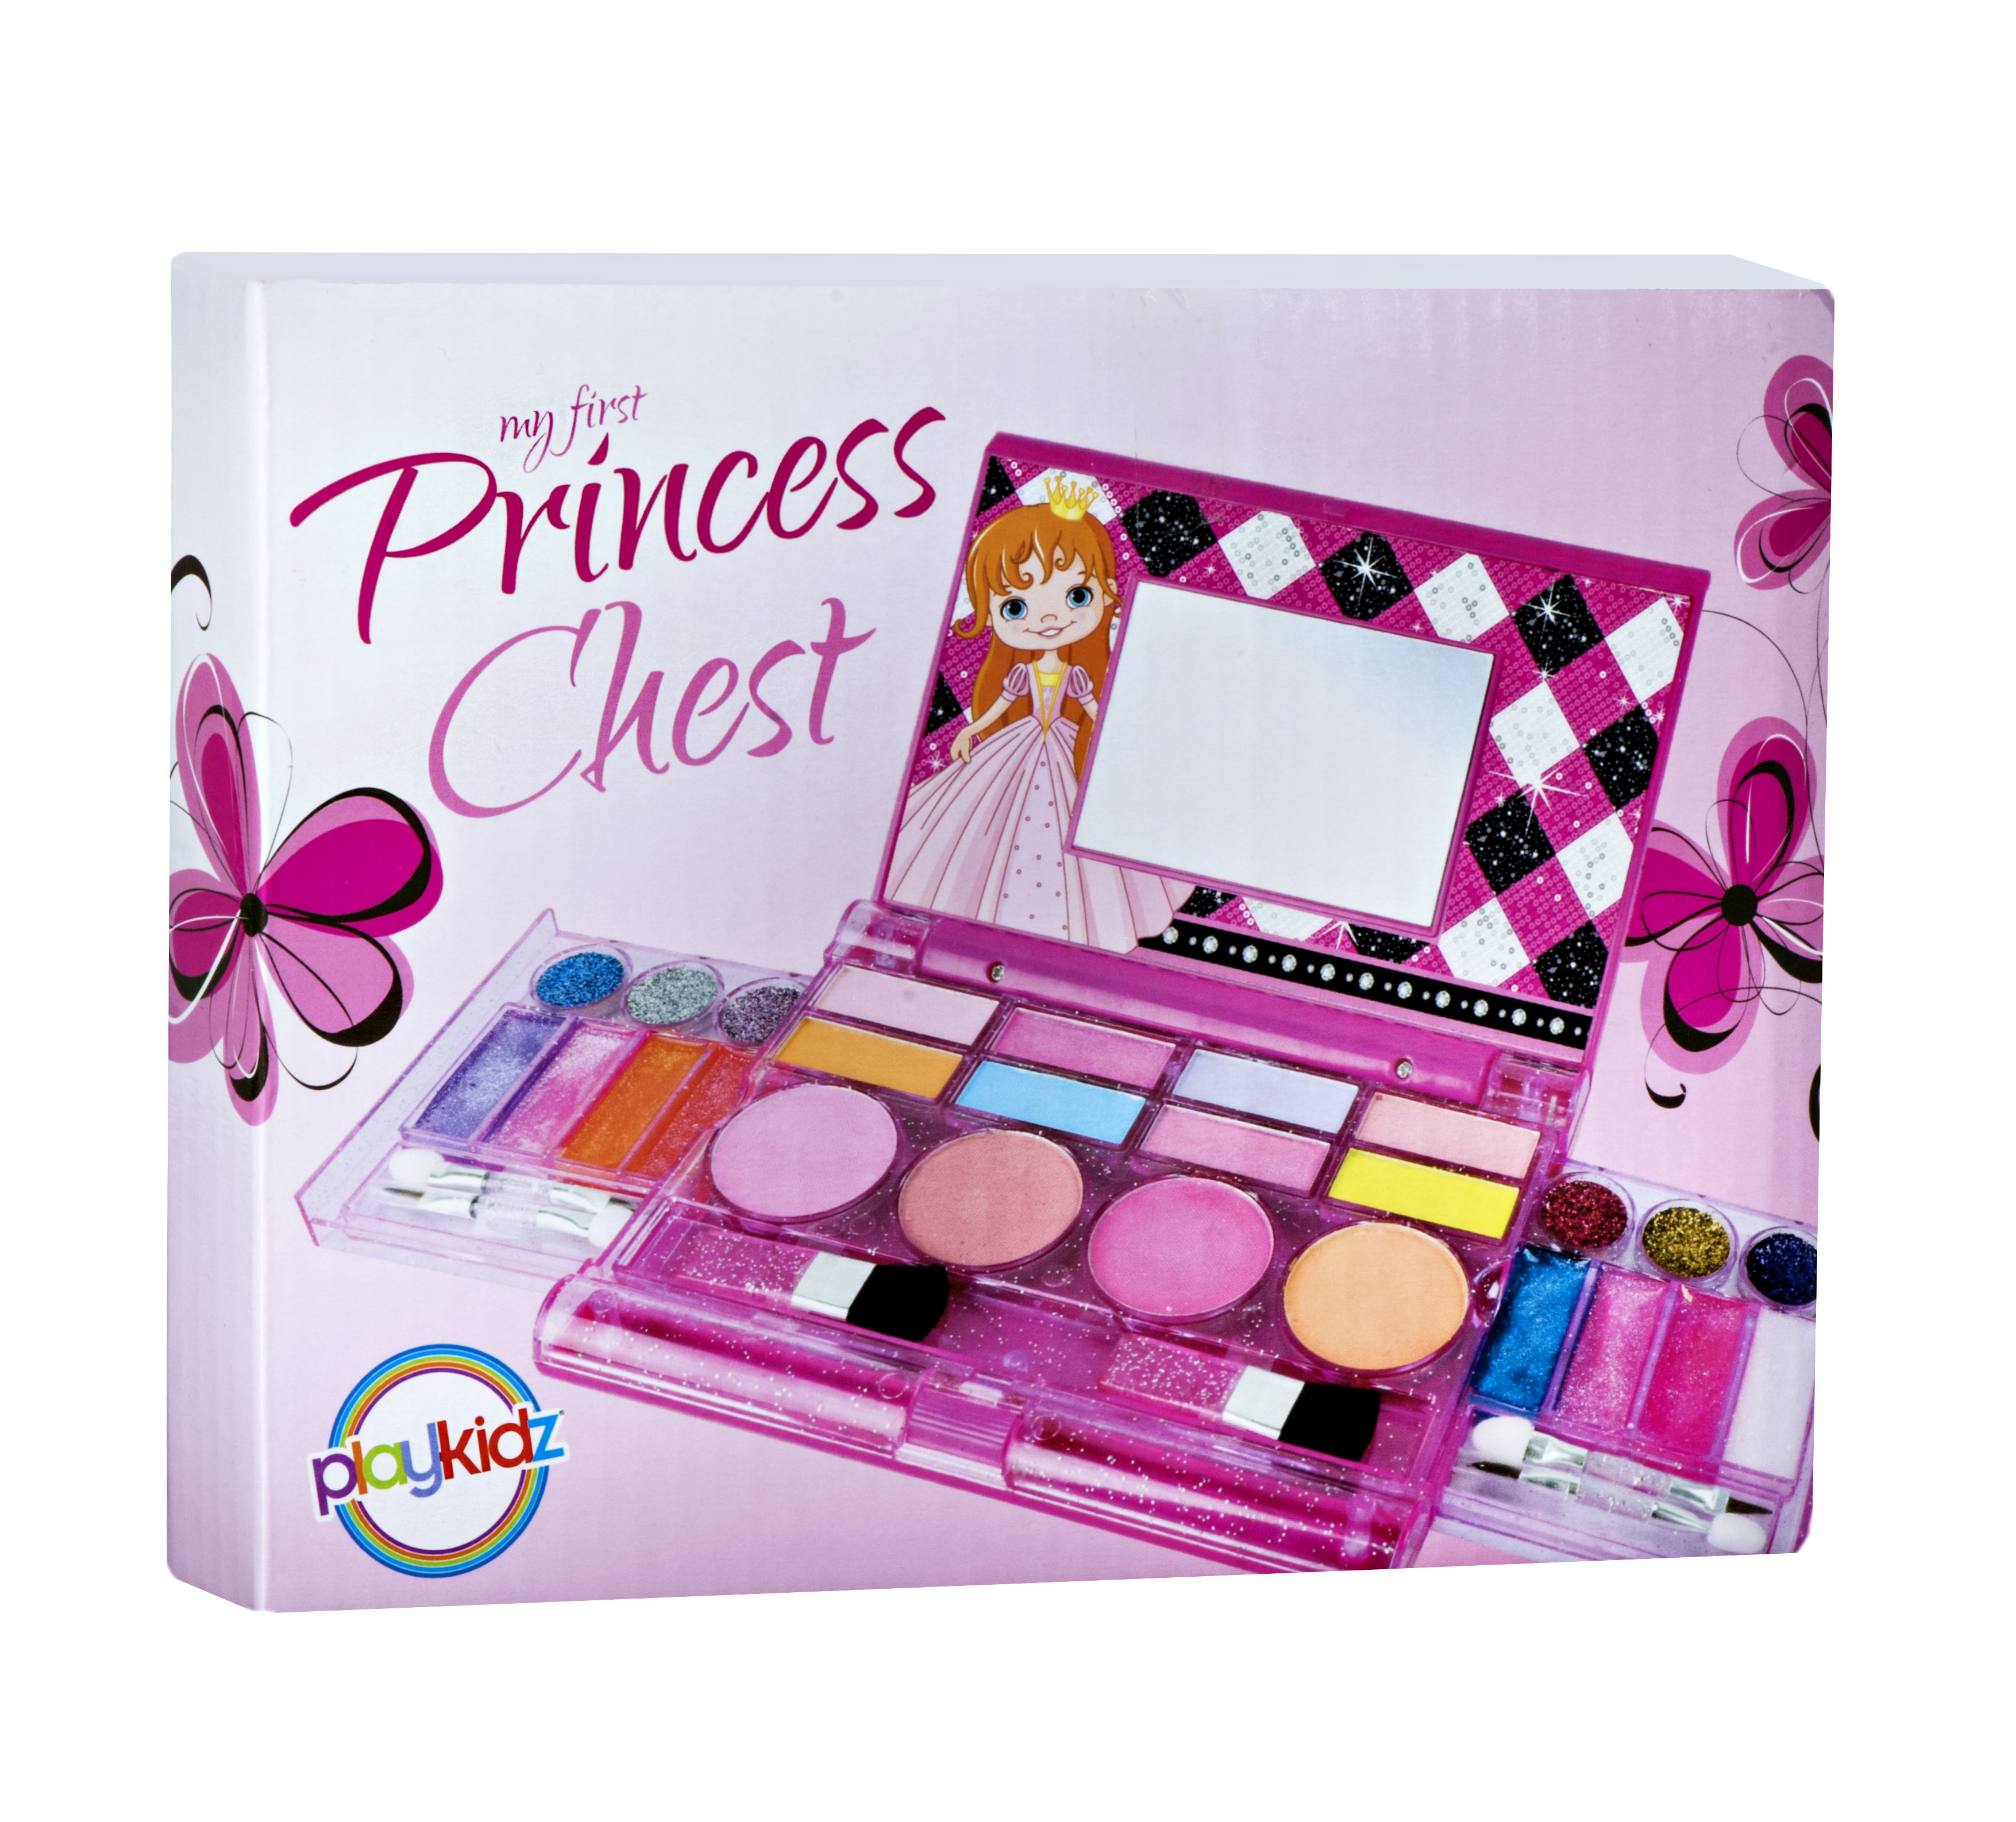 PlaykizPlaykidz: My First Princess Makeup Chest, Girl's All-In-One Deluxe Cosmetic and Real Makeup Palette with Mirror (Washable) - image 3 of 5